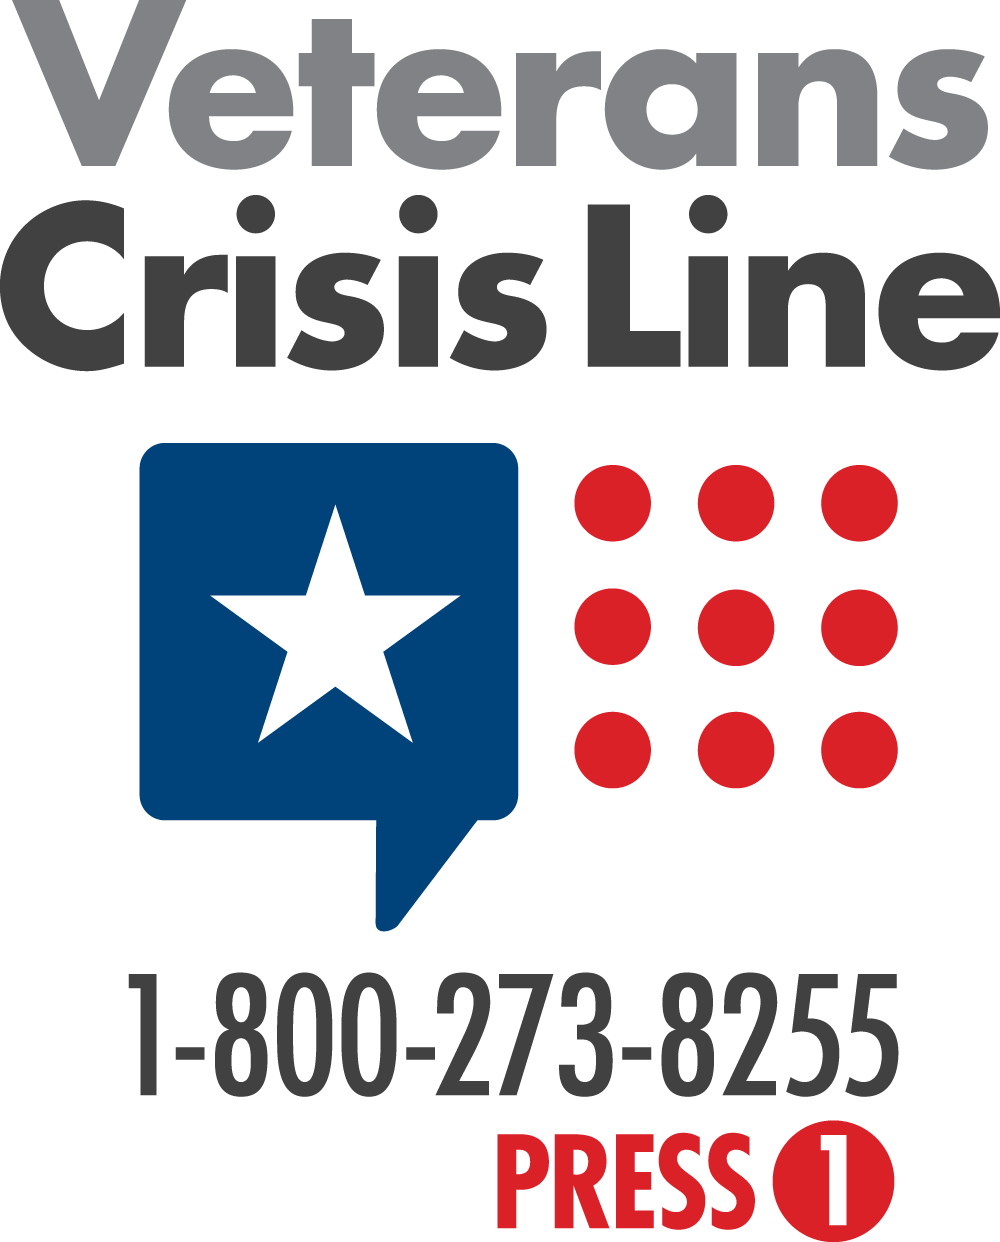 Veterans Crisis Line Logo and hyperlink to https://www.veteranscrisisline.net/. If you are in need call 1-800-273-8255 and press 1.